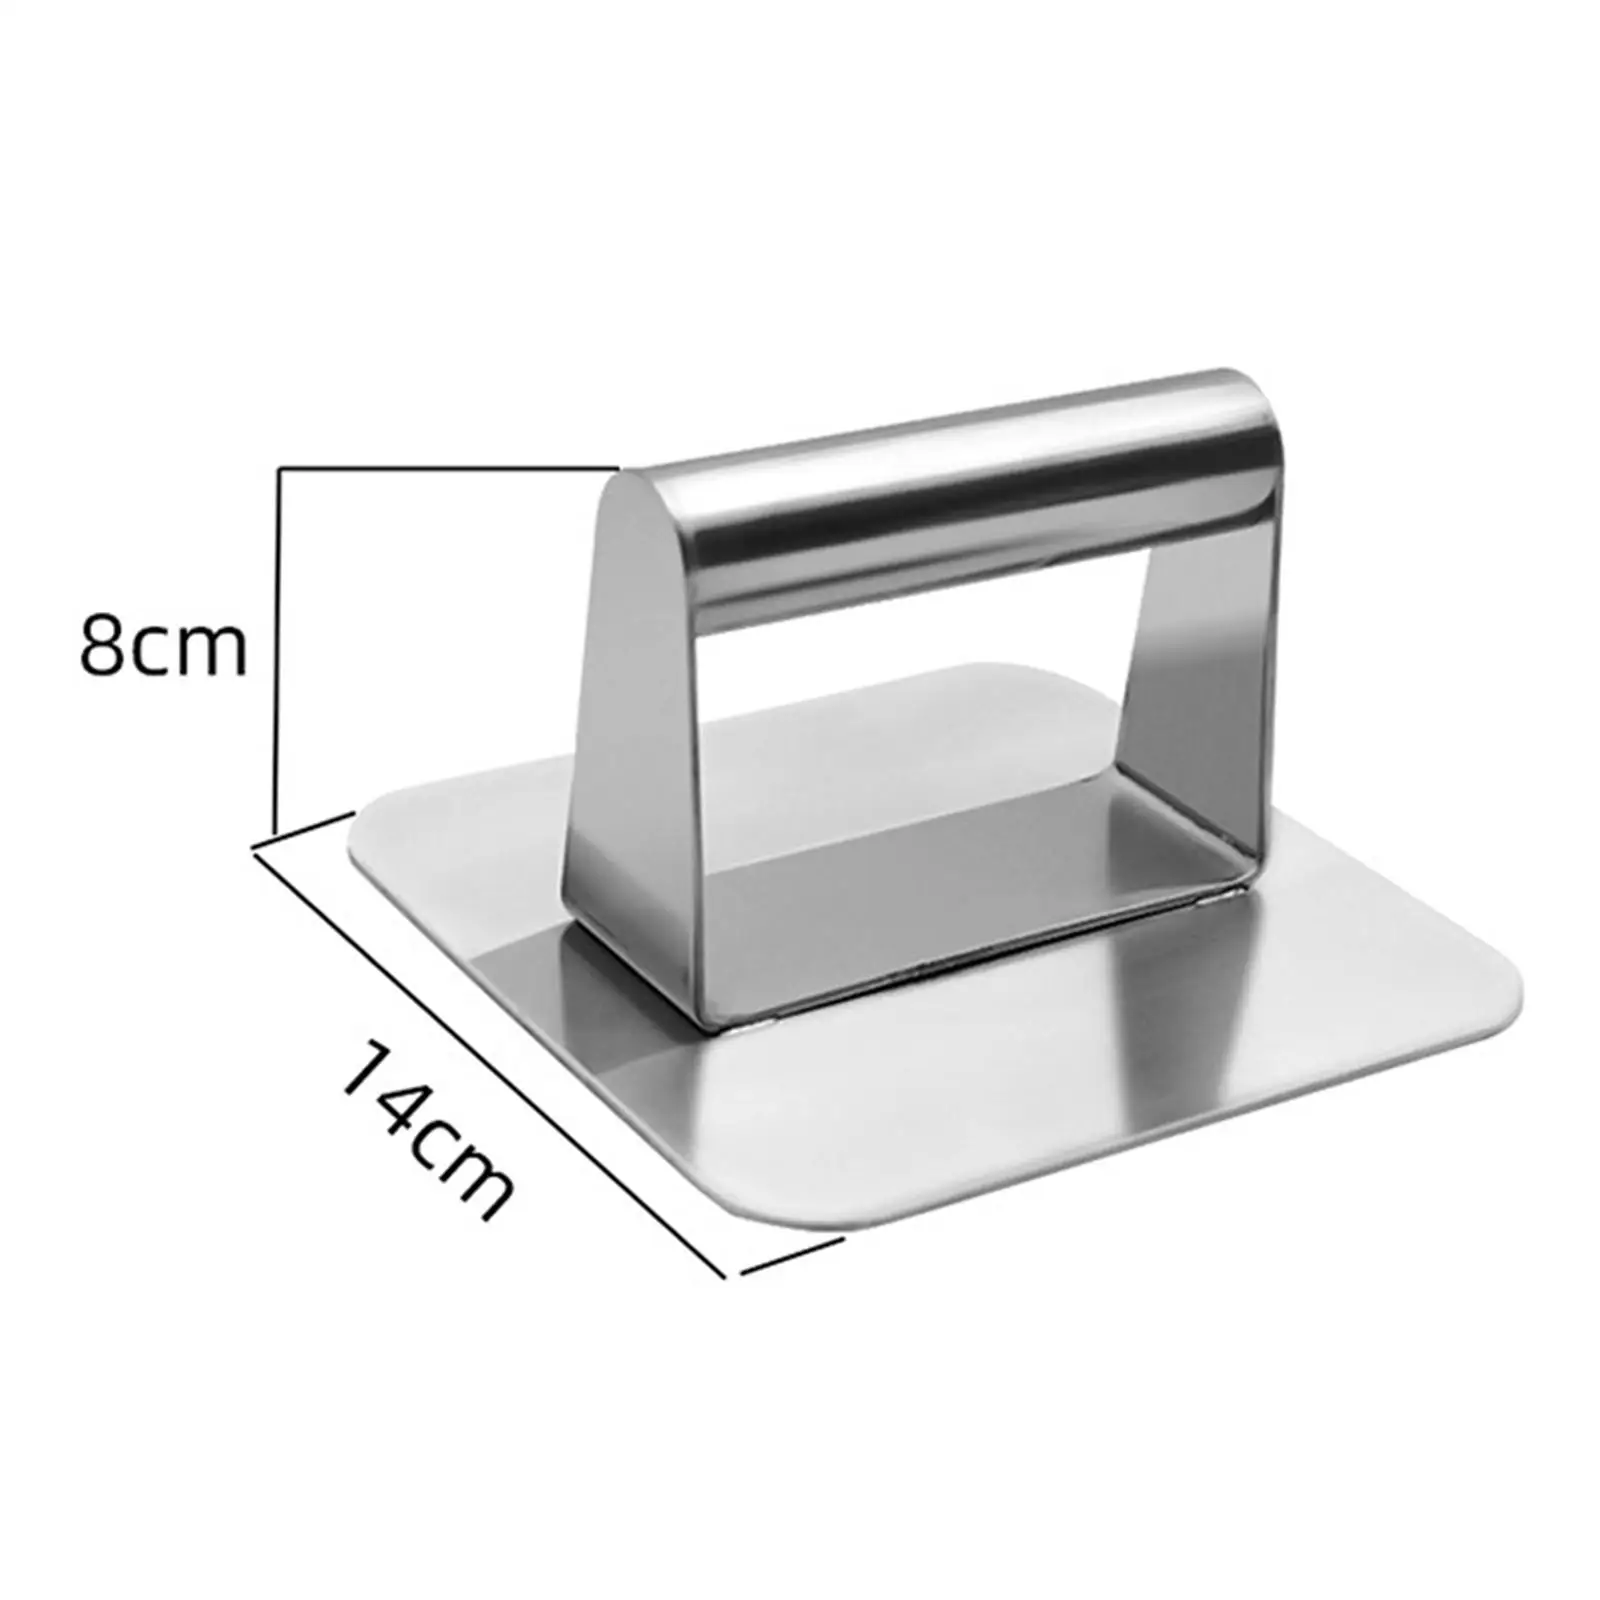 304 Stainless Steel Burger Press for Flat Top Griddle Grill Cooker Hamburger Patty Maker for Steaks Meat Sandwich Beef Barbecue